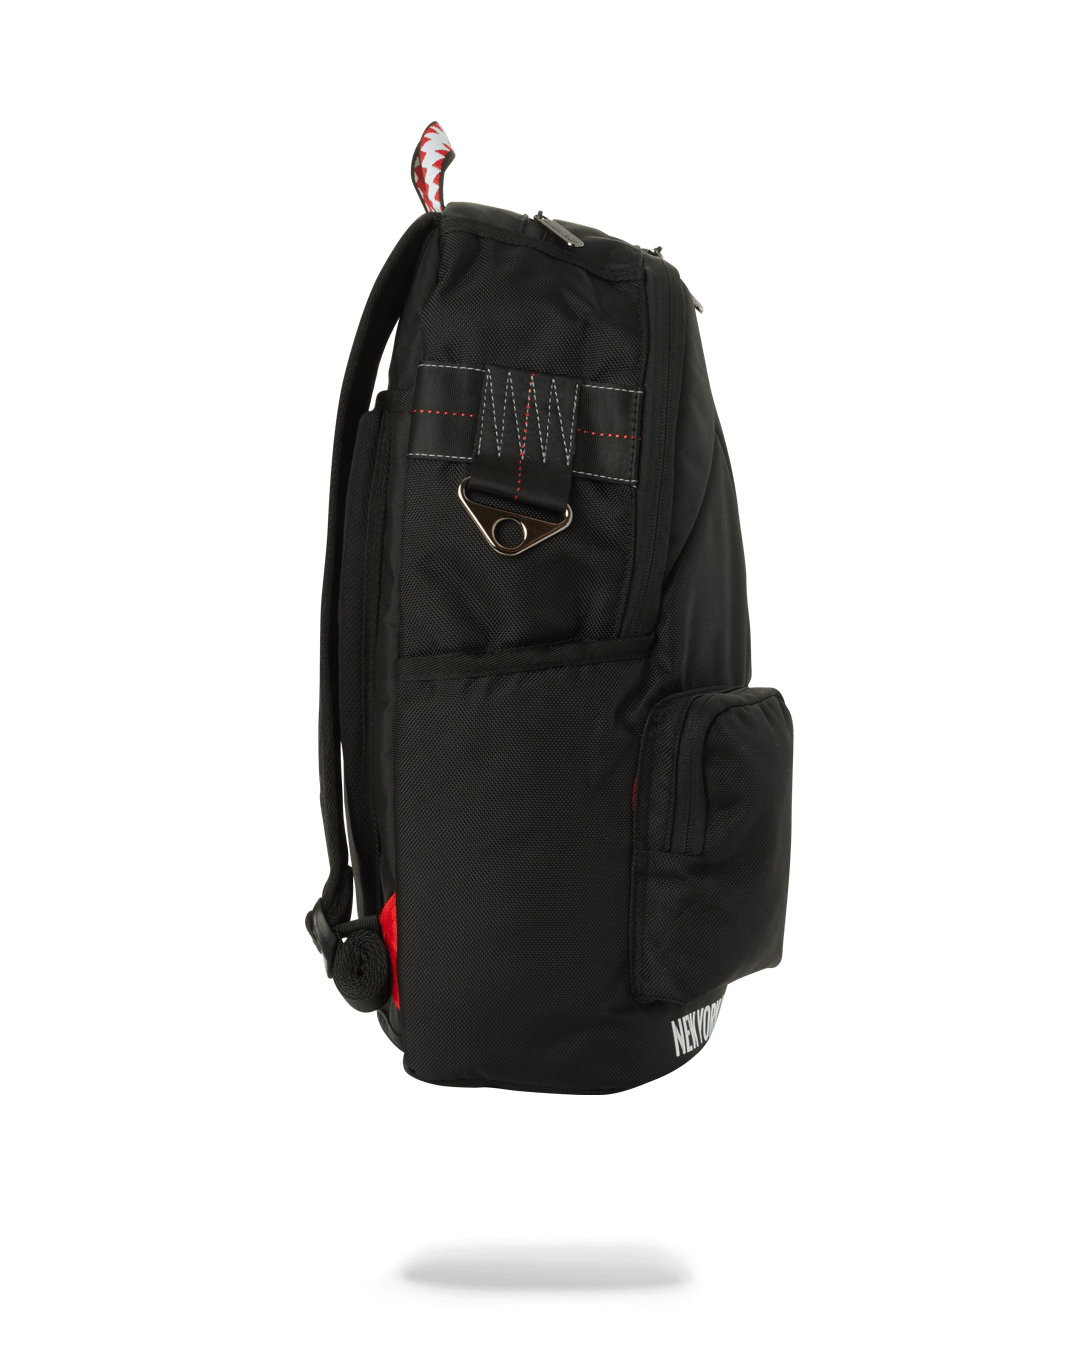 Cheap - Sale Sprayground Shadow Shark Backpack Discount authentic sale - At 0